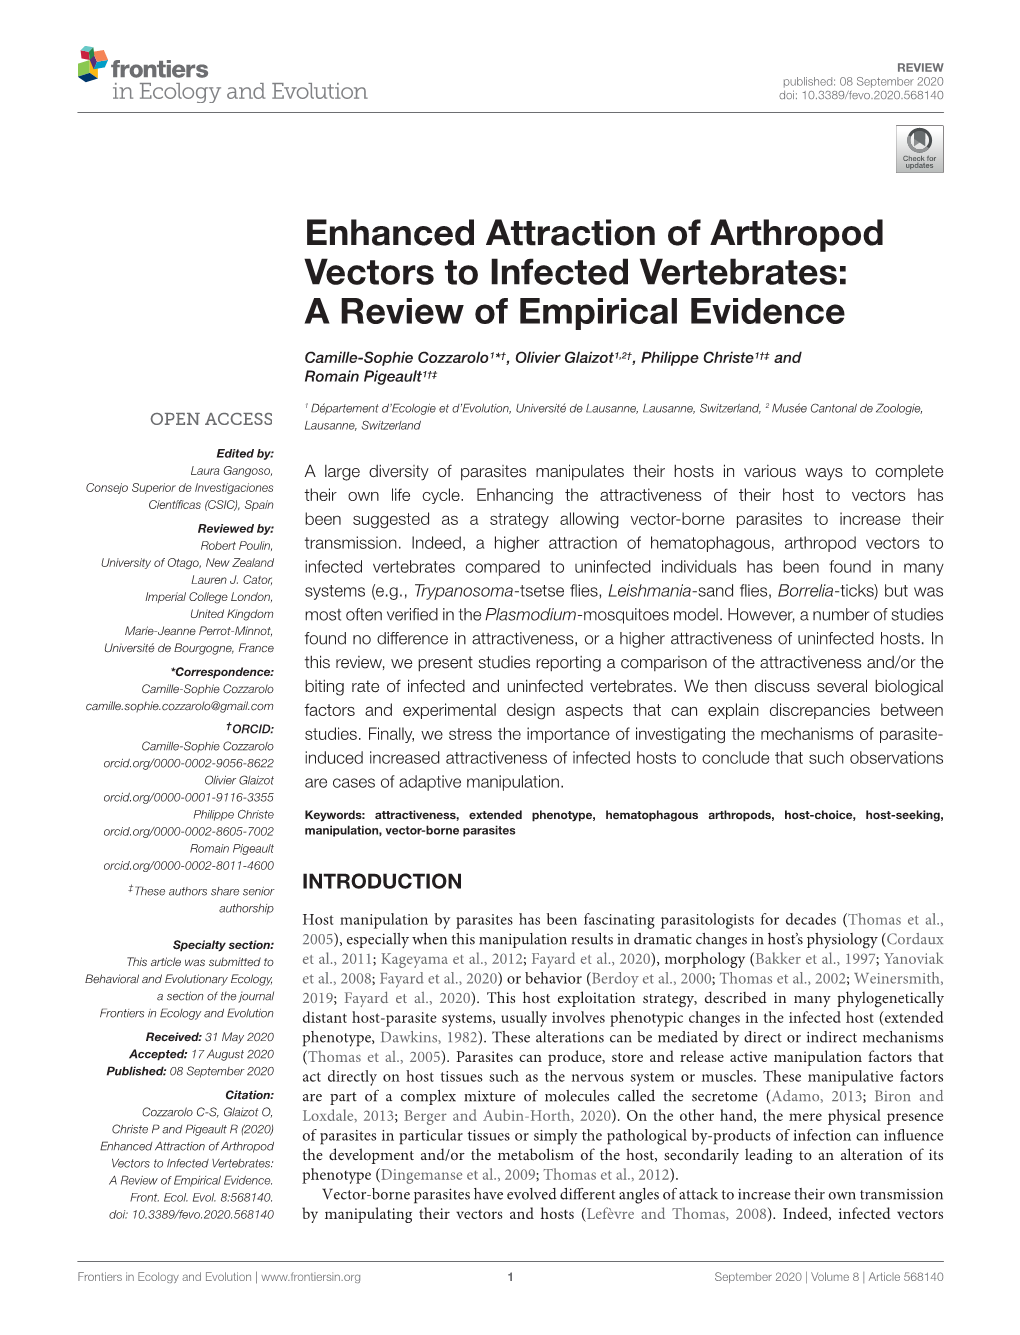 Enhanced Attraction of Arthropod Vectors to Infected Vertebrates: a Review of Empirical Evidence